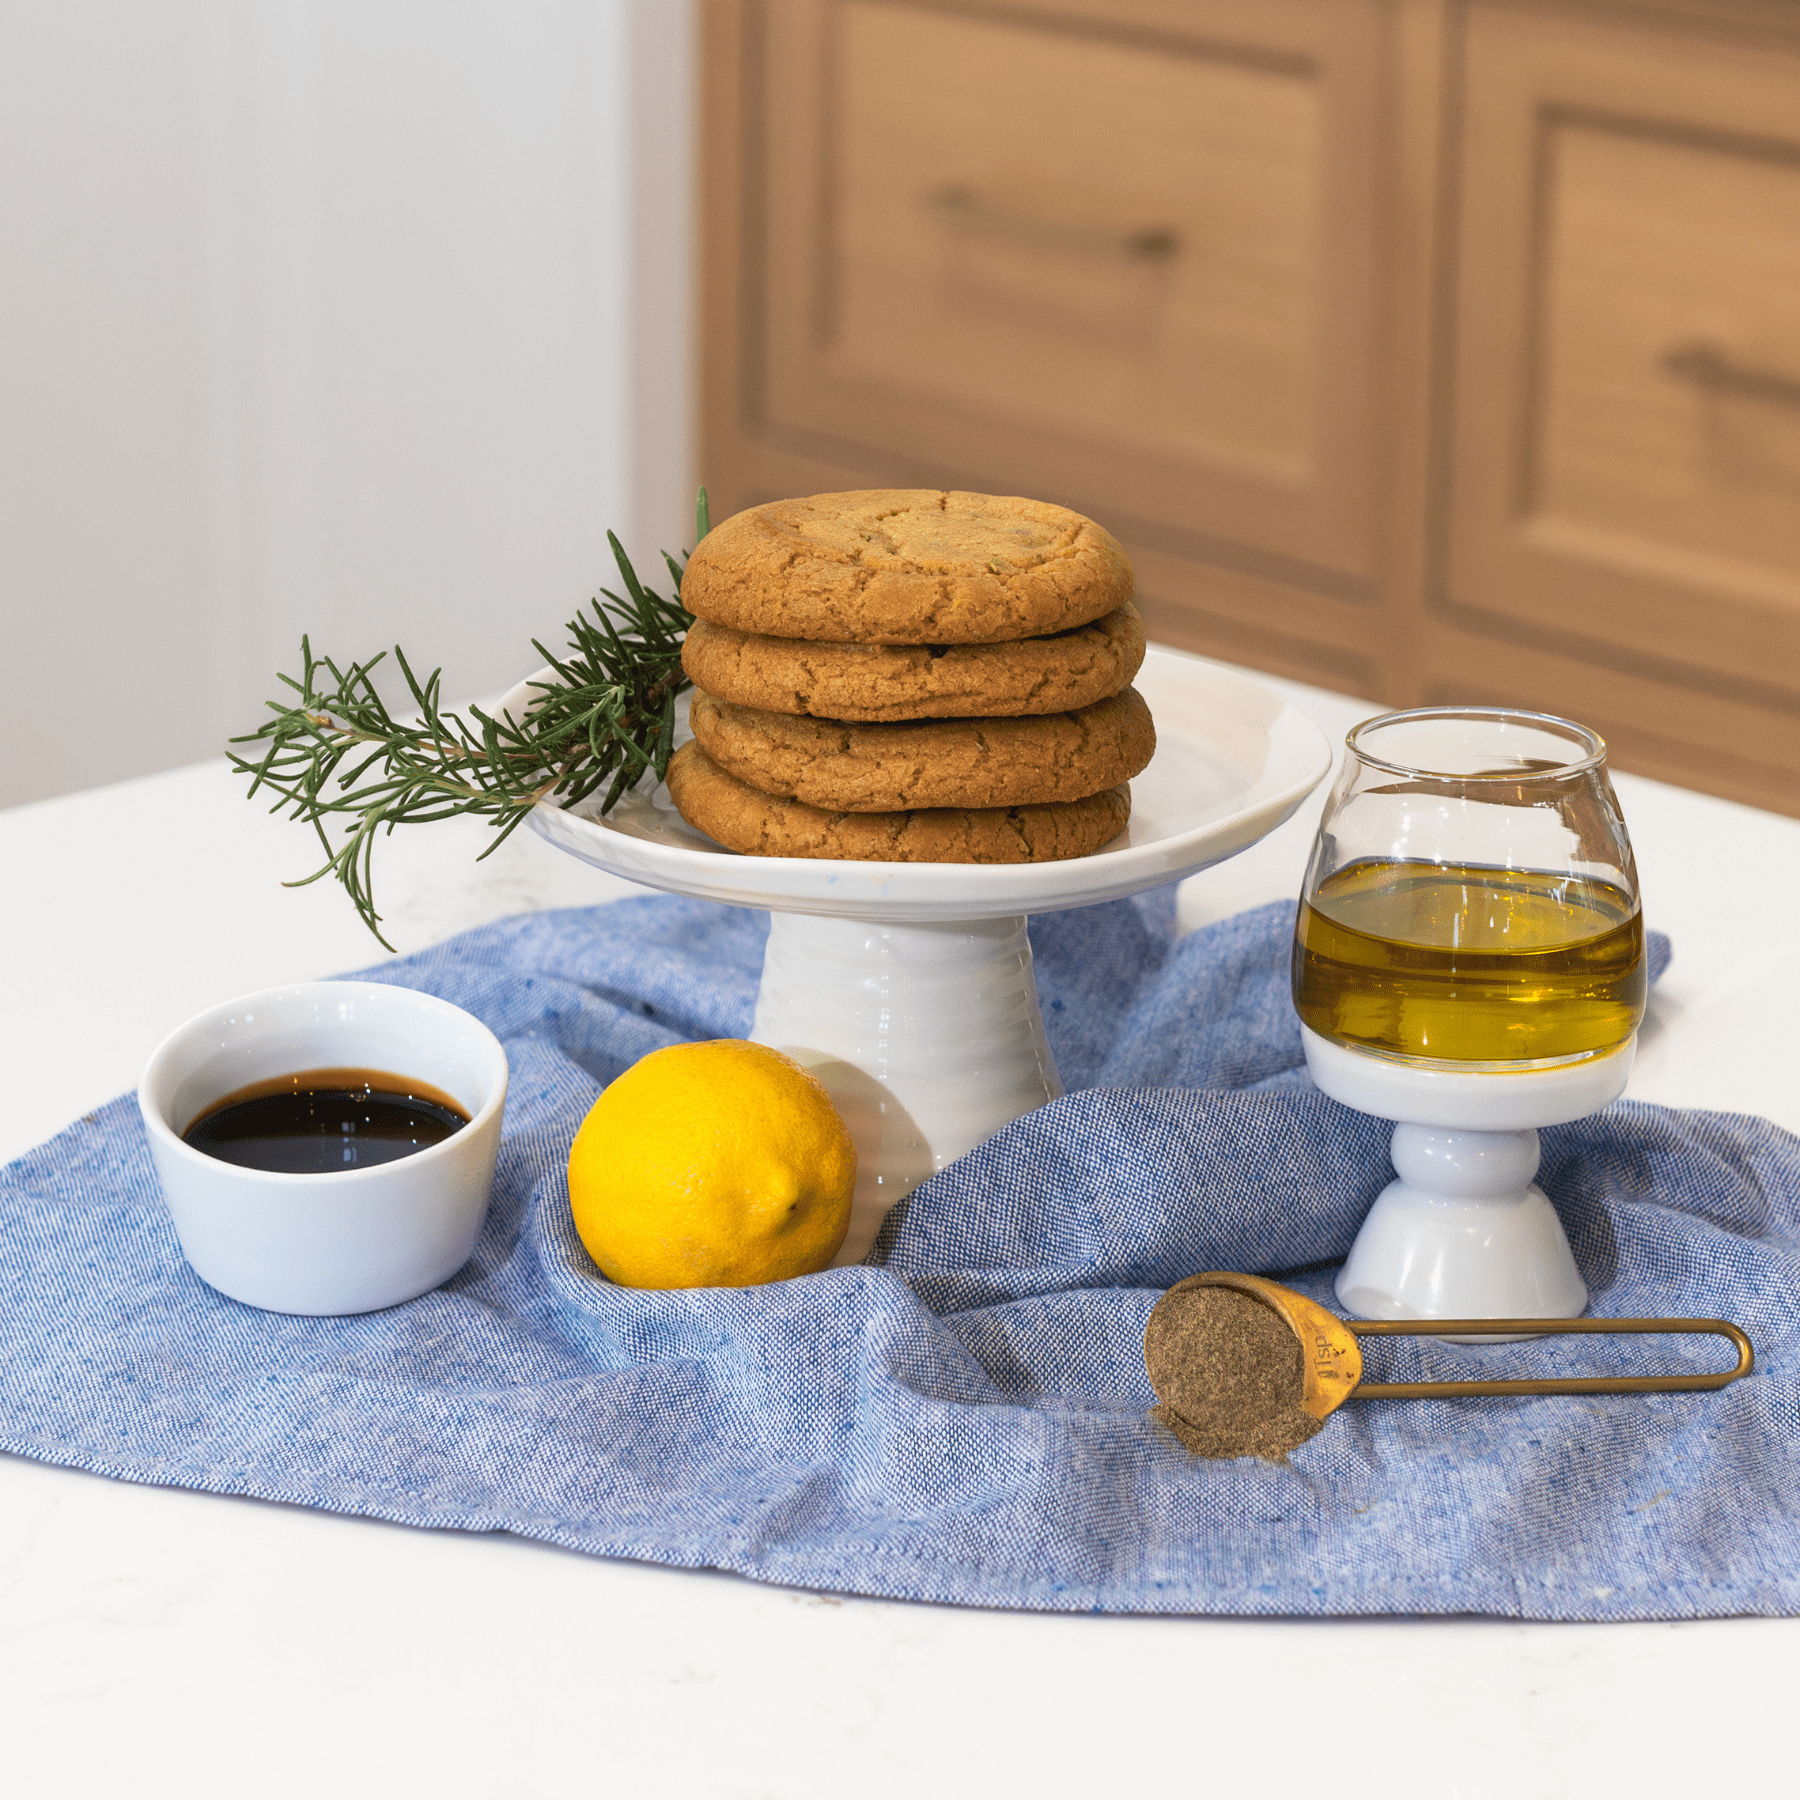 Rosemary Balsamic cookies stacked on tray